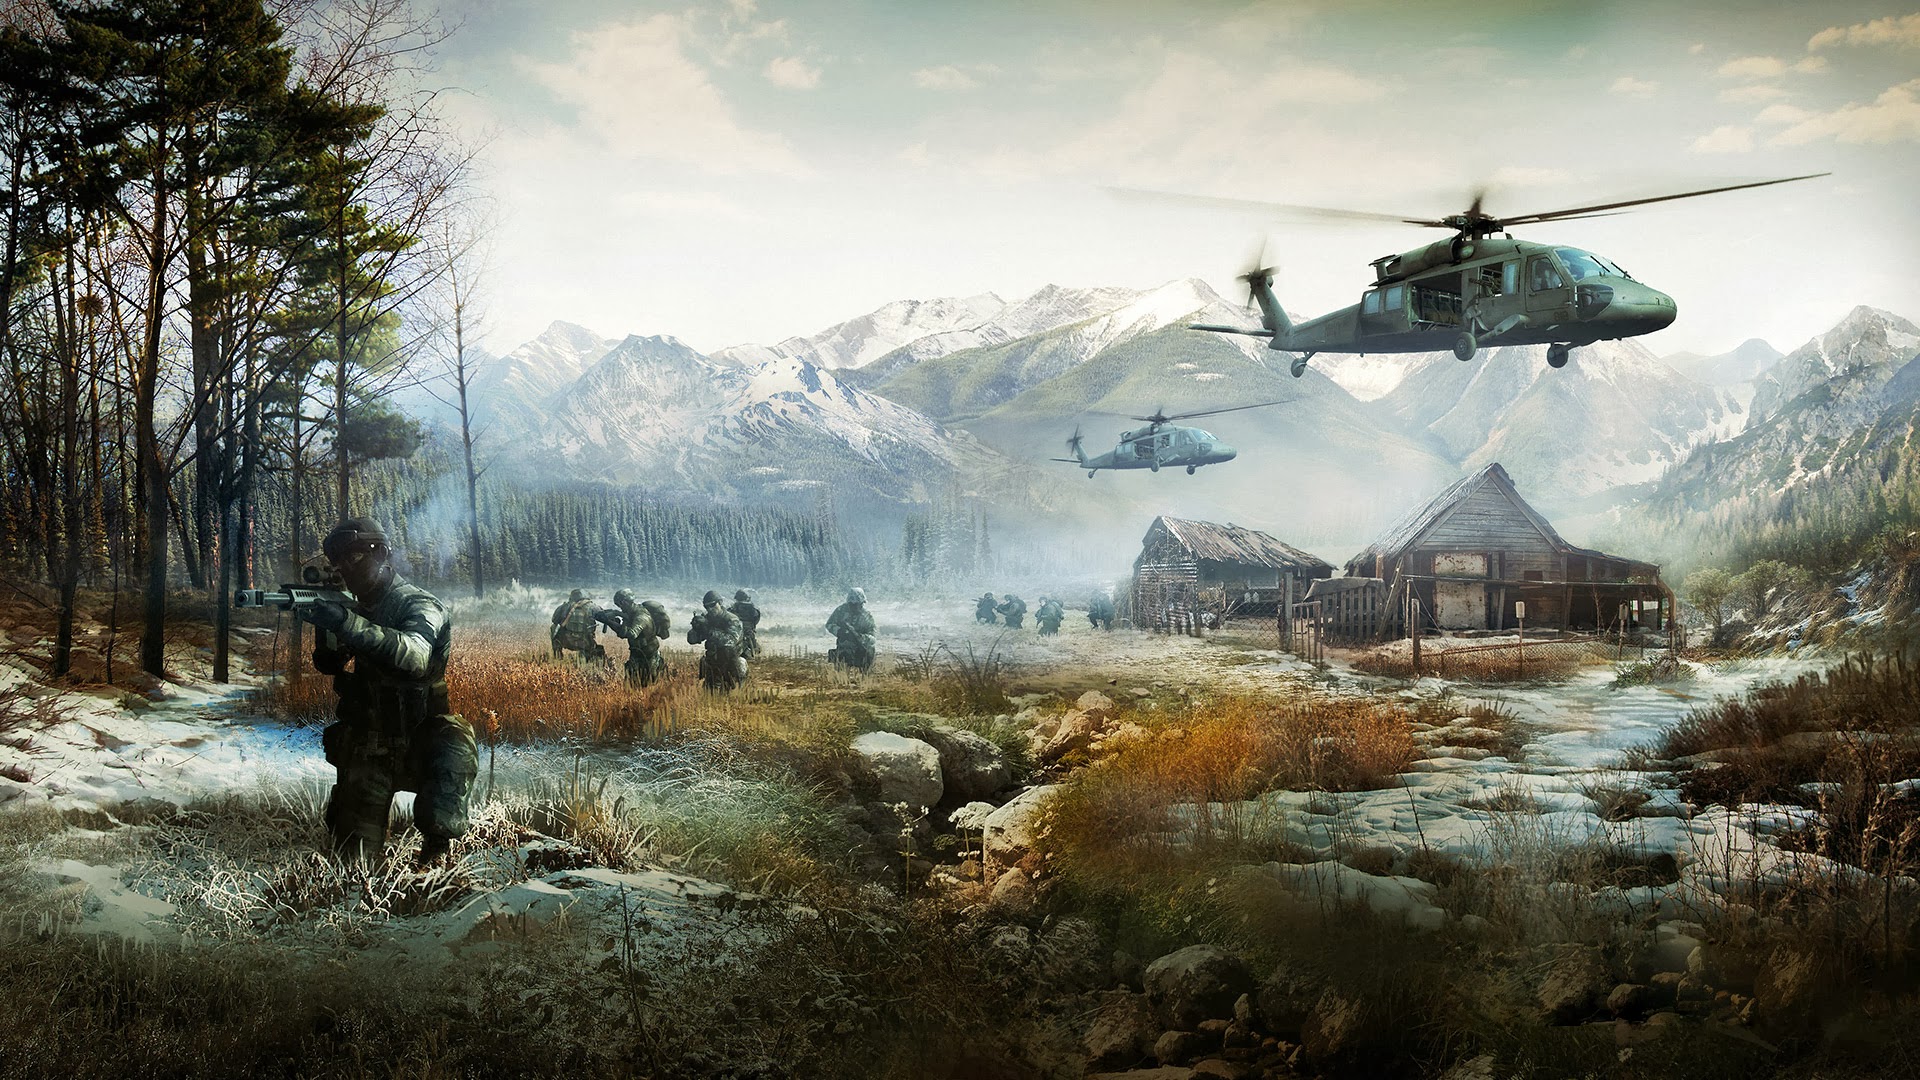 battlefield 4 game hd wallpaper helicopter soldier scenery mountains